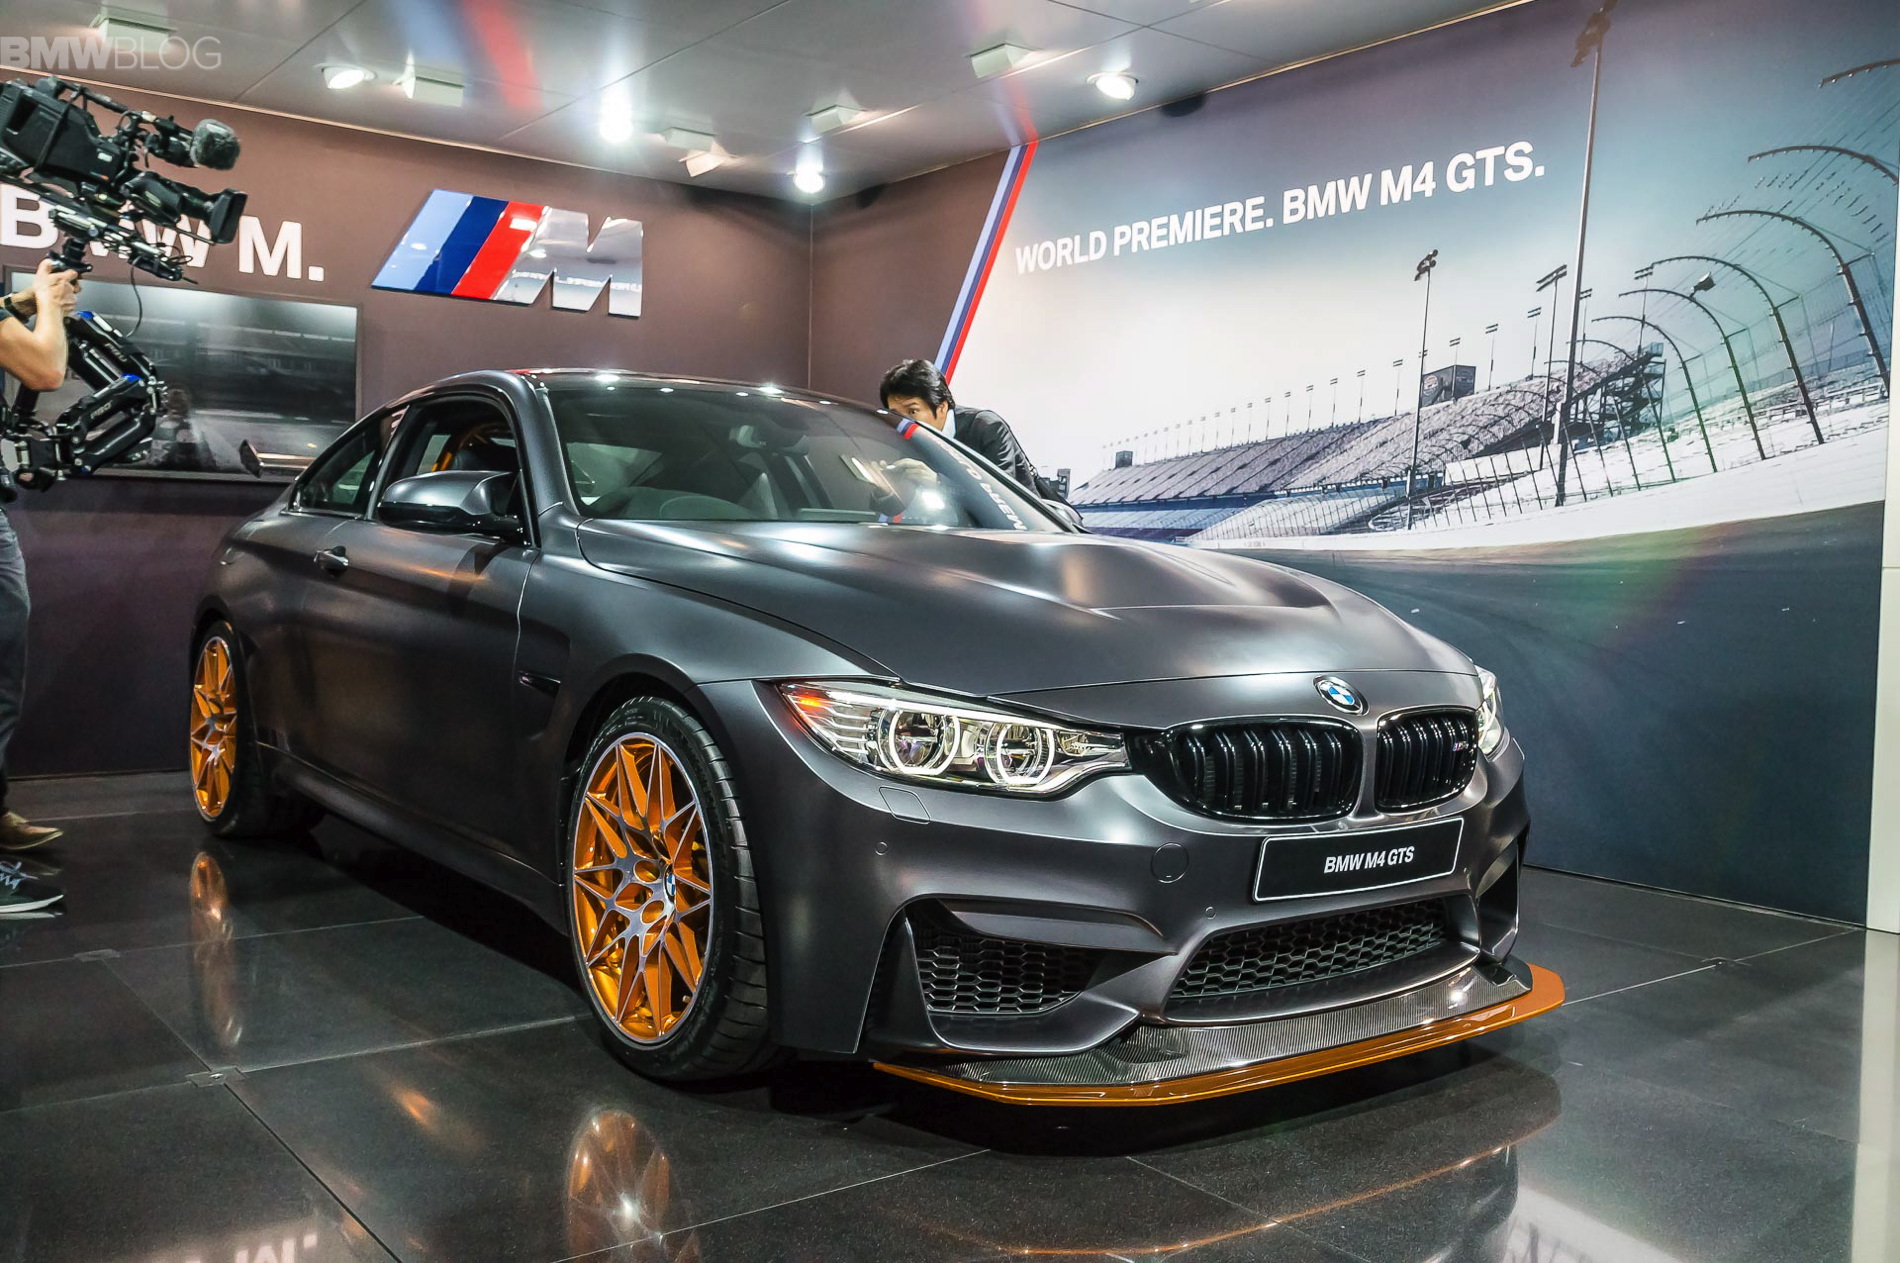 BMW builds only five M4 GTS models per day